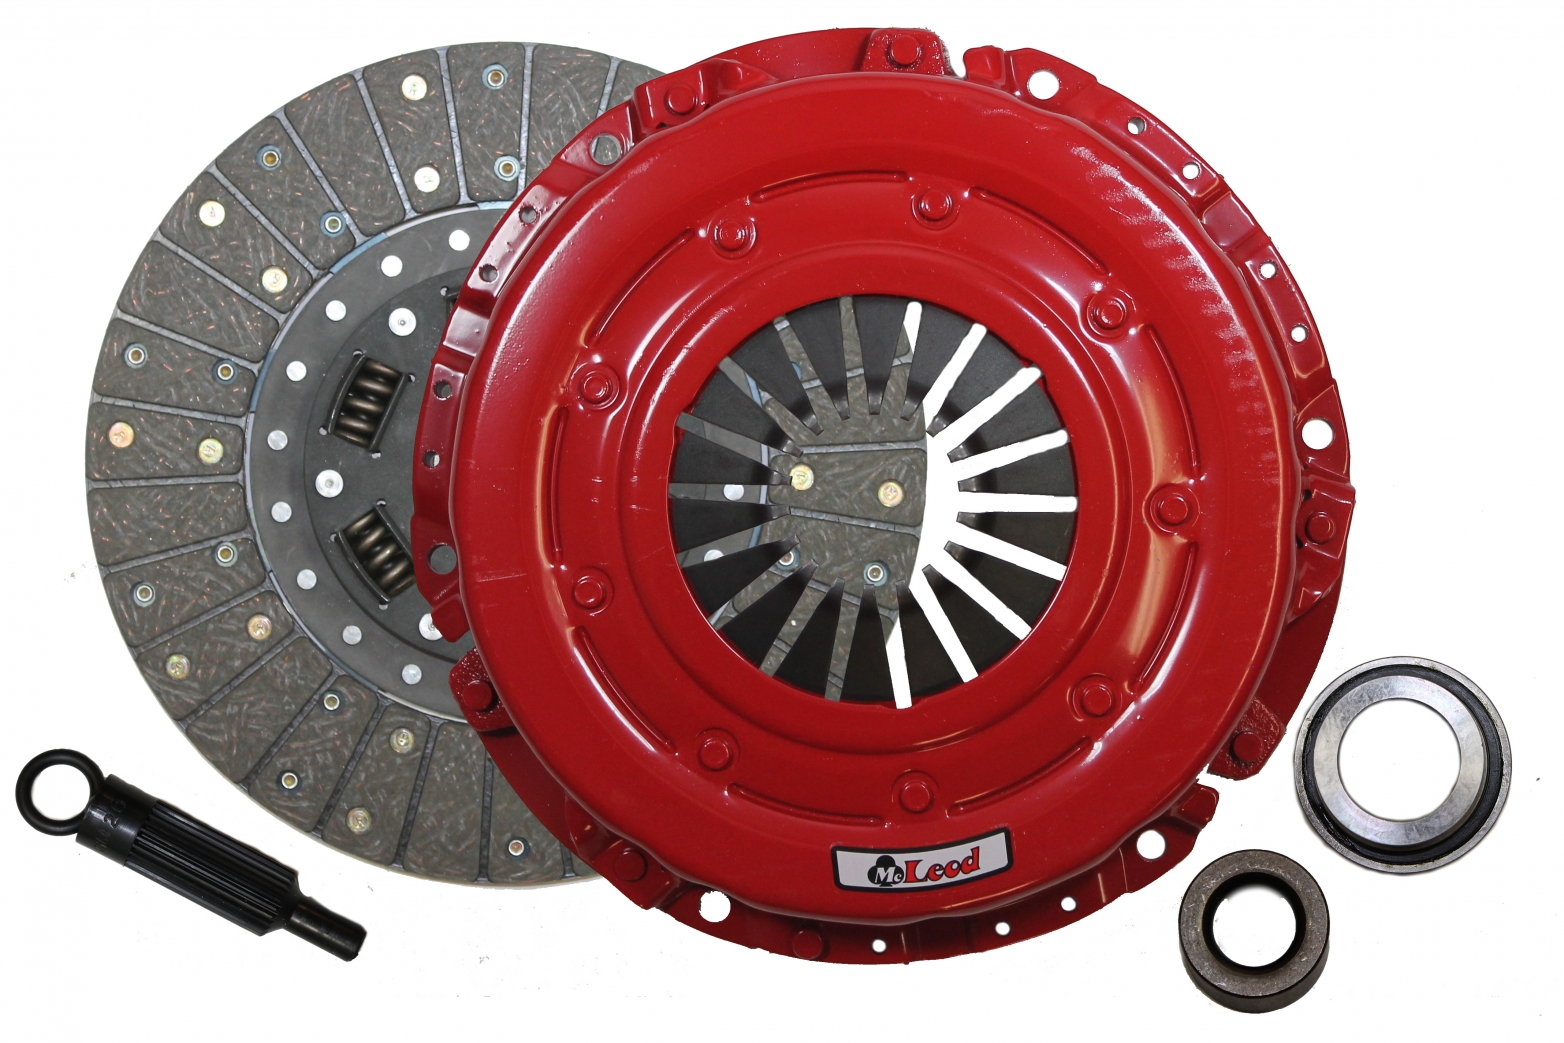 McLeod 75007 Street level Clutch Kit for 1996-2001 Ford Mustang 4.6 L Engine